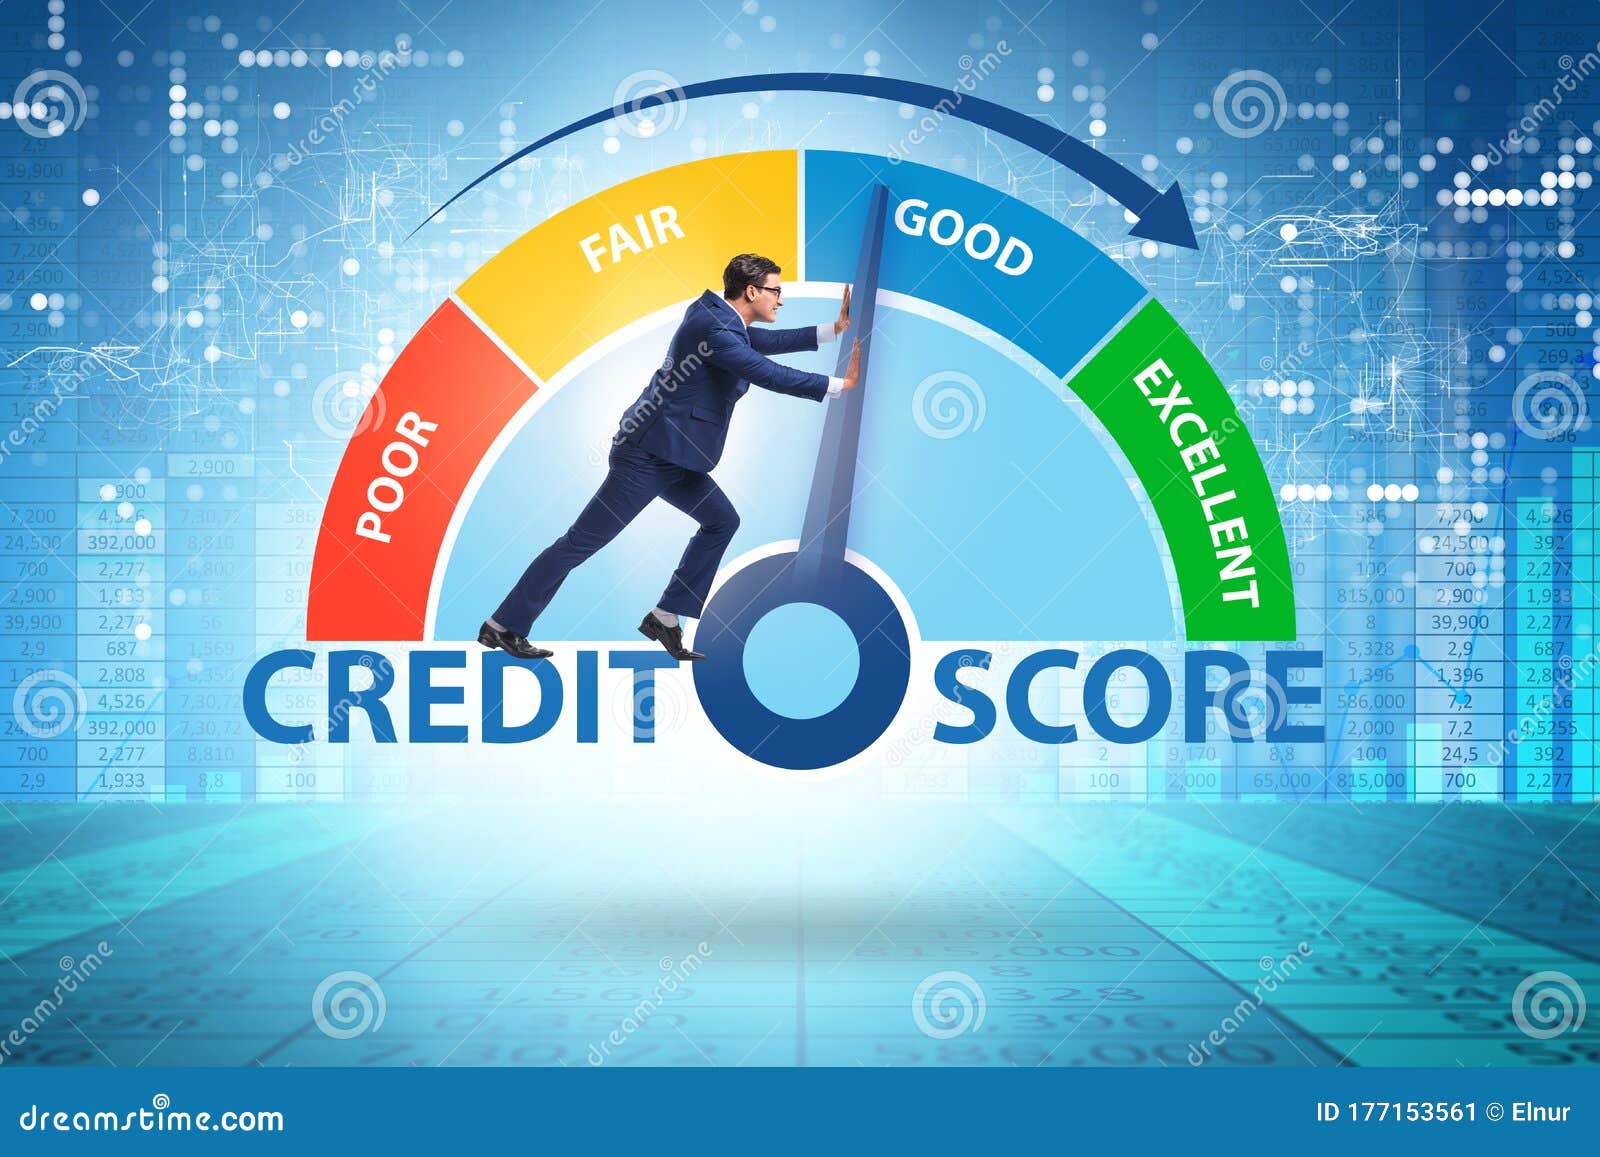 businessman trying to improve credit score